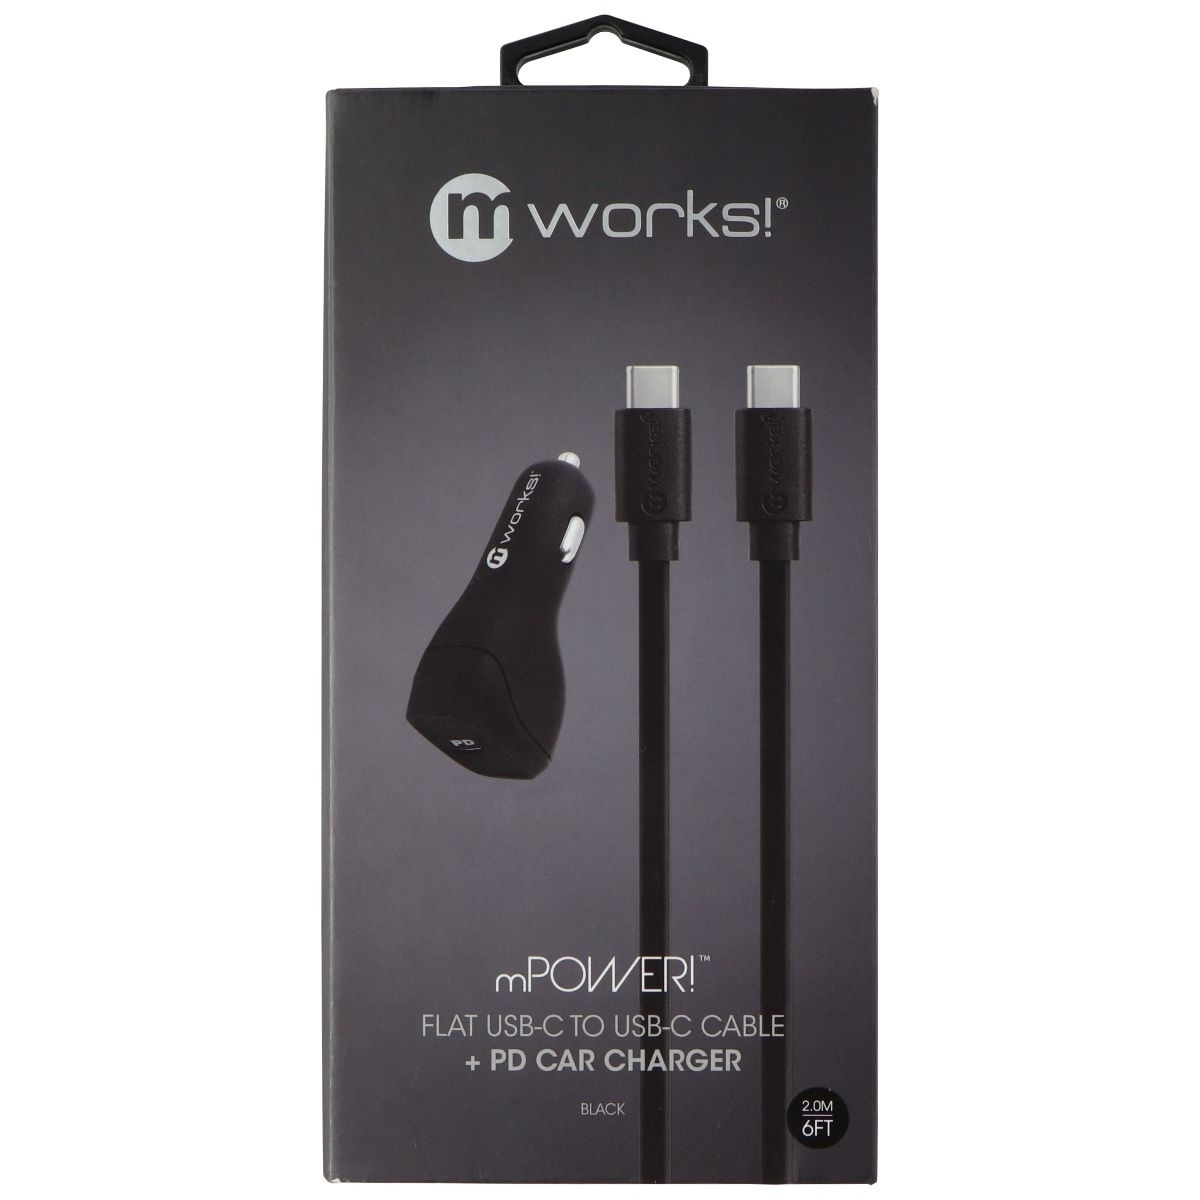 MWorks! MPOWER! Single Port USB-C Car Charger With USB-C To USB-C Cable - Black